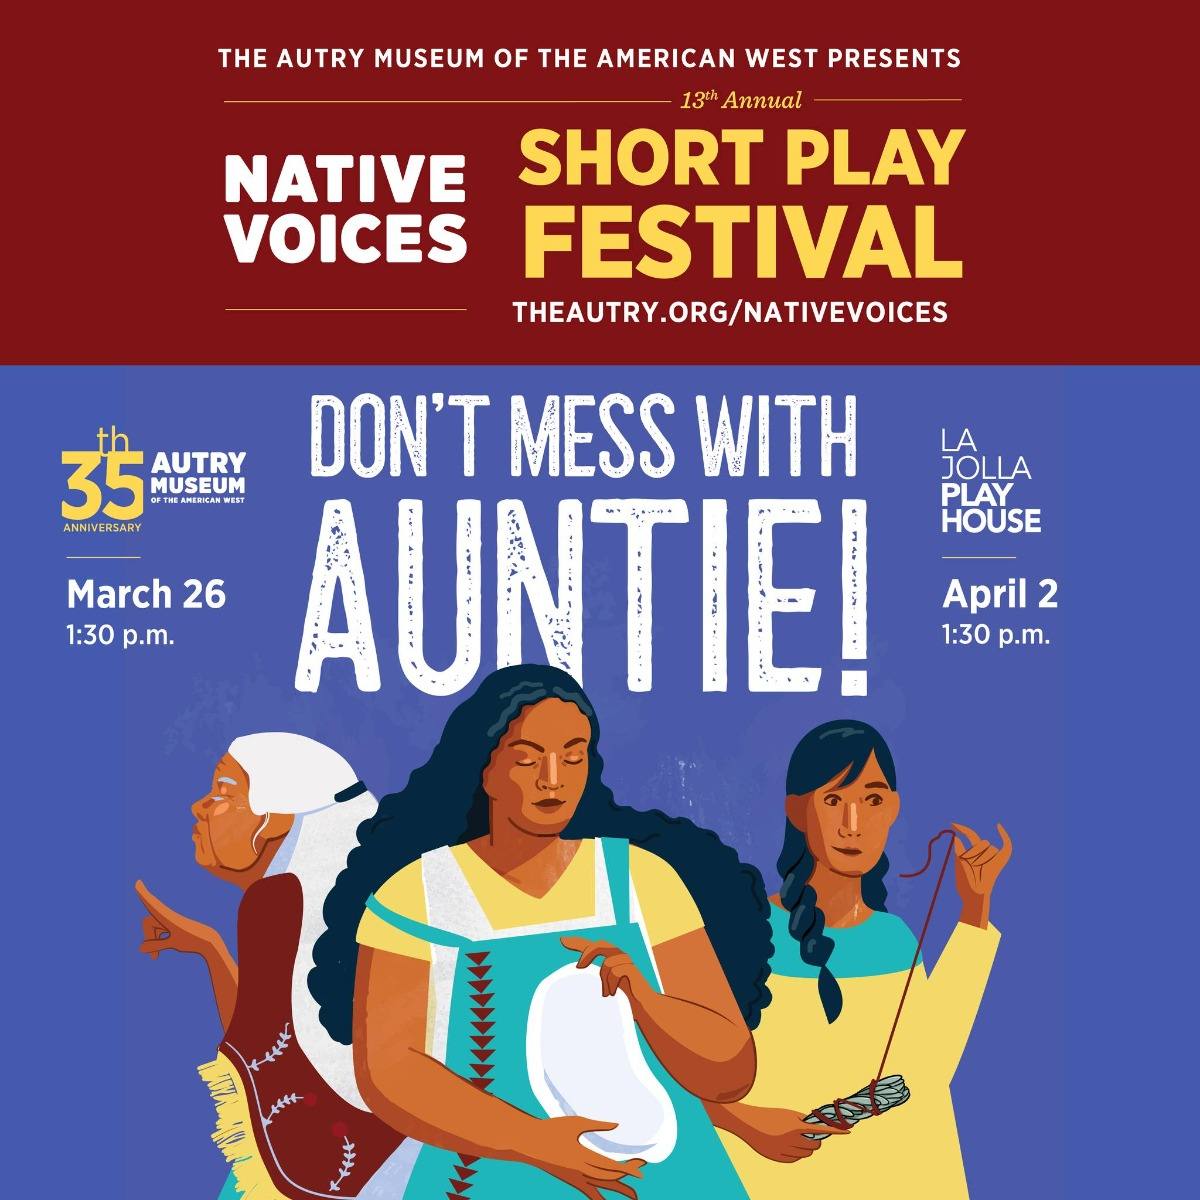 The Autry Museum of the American West Presents 13th Annual Native Voices Short Play Festival, Don't Mess With Auntie! Theautry.org/native voices. March 26, 2023 at 1:30pm at the Autry Museum of the American West. April 2, 2023 at 1:30pm at the La Jolla Playhouse. Image features drawing of three women.